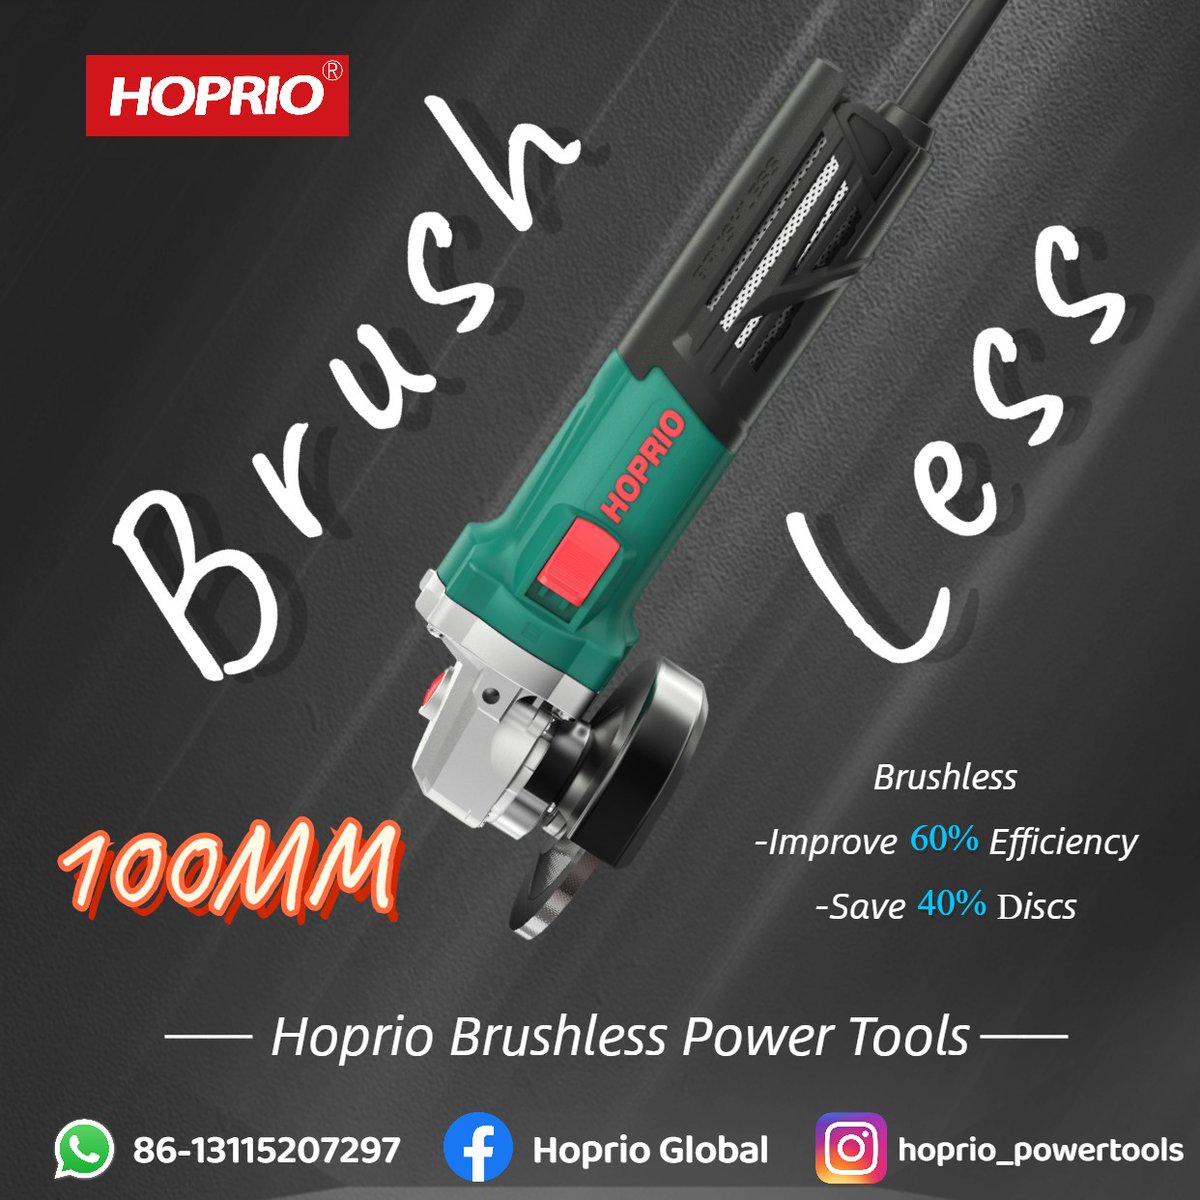 Hoprio Brushless Angle Grinder 100MM 4 Inch 

🚩Deatils:
Rated Power: 850W 
Max Power: 1000W 
Rated Speed: 12000r/min 
Spindle: M14 
Voltage: 220V-240V, 50-60Hz
#cordedtools #cordedanglegrinder #electrictools #electrictool #industrialtools #industrial  #brushlesstools #hoprio